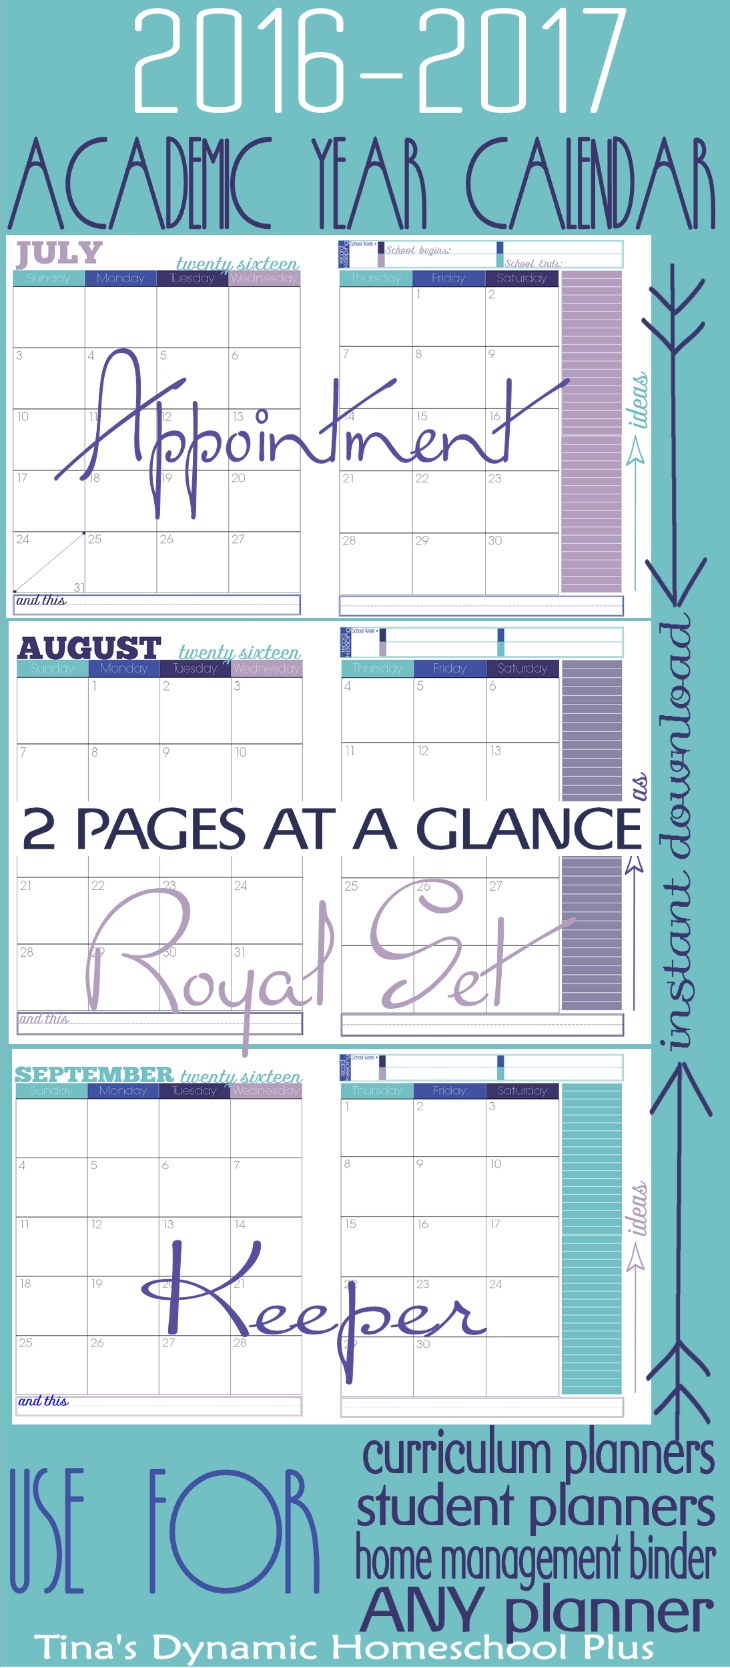 2016 to 2017 Academic Year Royal 2 Pages at a Glance @ Tina's Dynamic Homeschool Plus